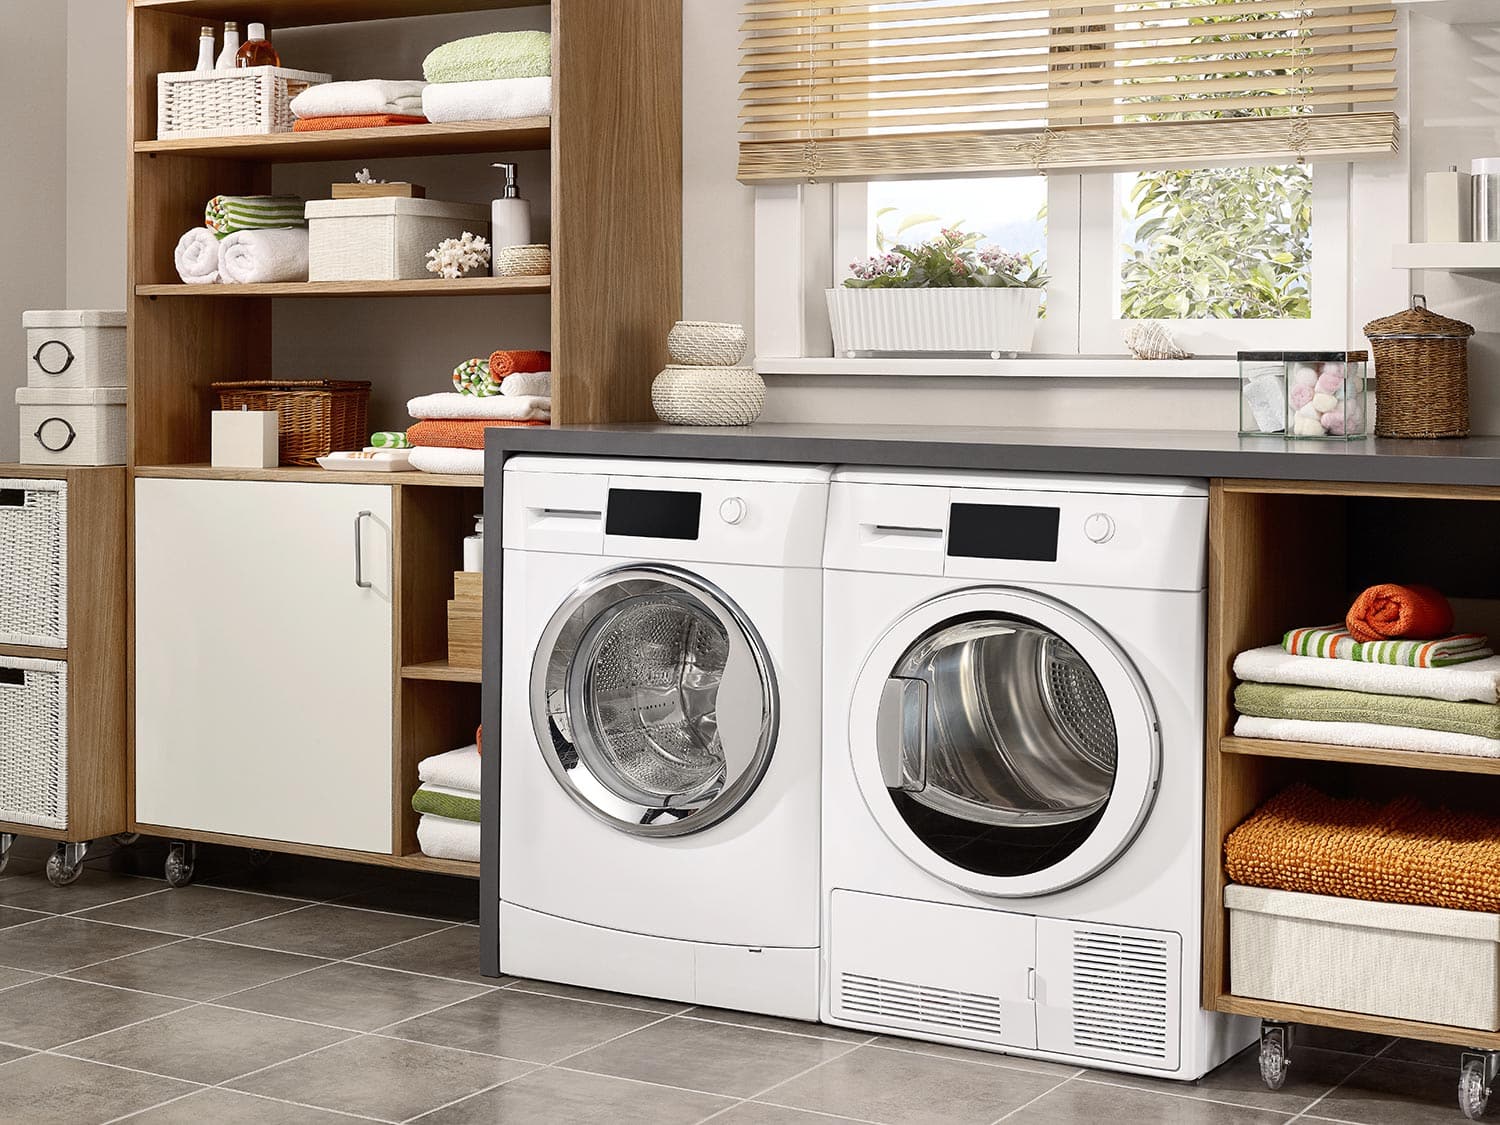 Domestic laundry room with washing machine and dryer